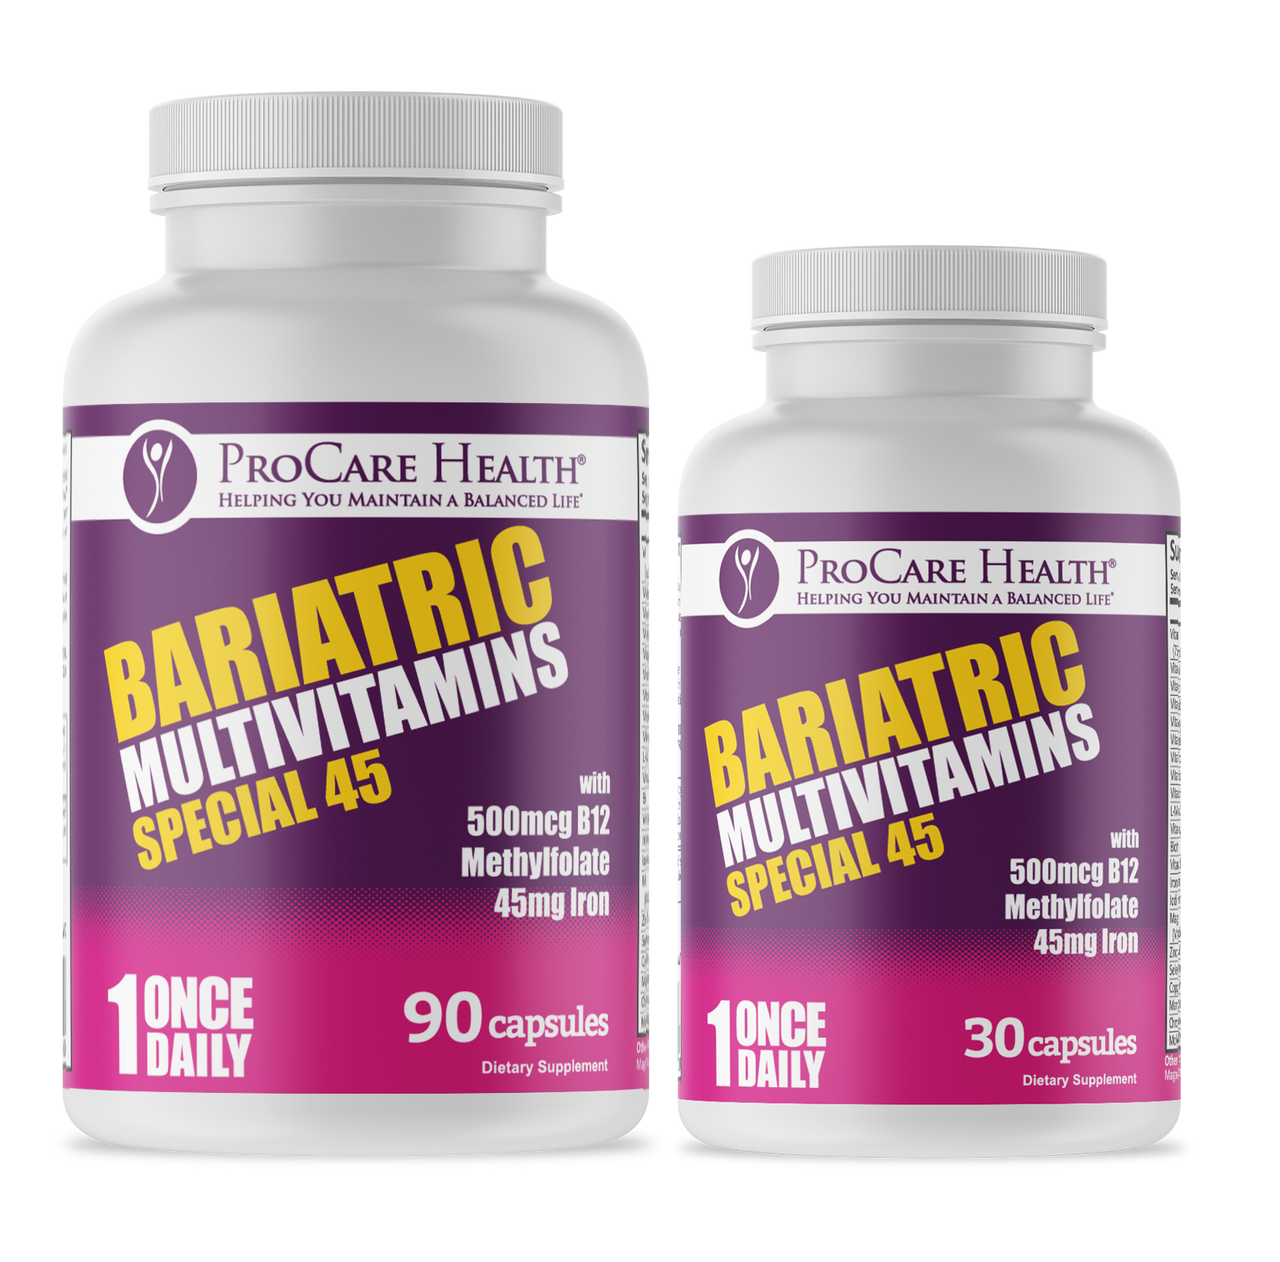 ProCare Health "1 per Day!" Bariatric Multivitamin Capsule - Special 45 - High-quality Multivitamins by ProCare Health at 